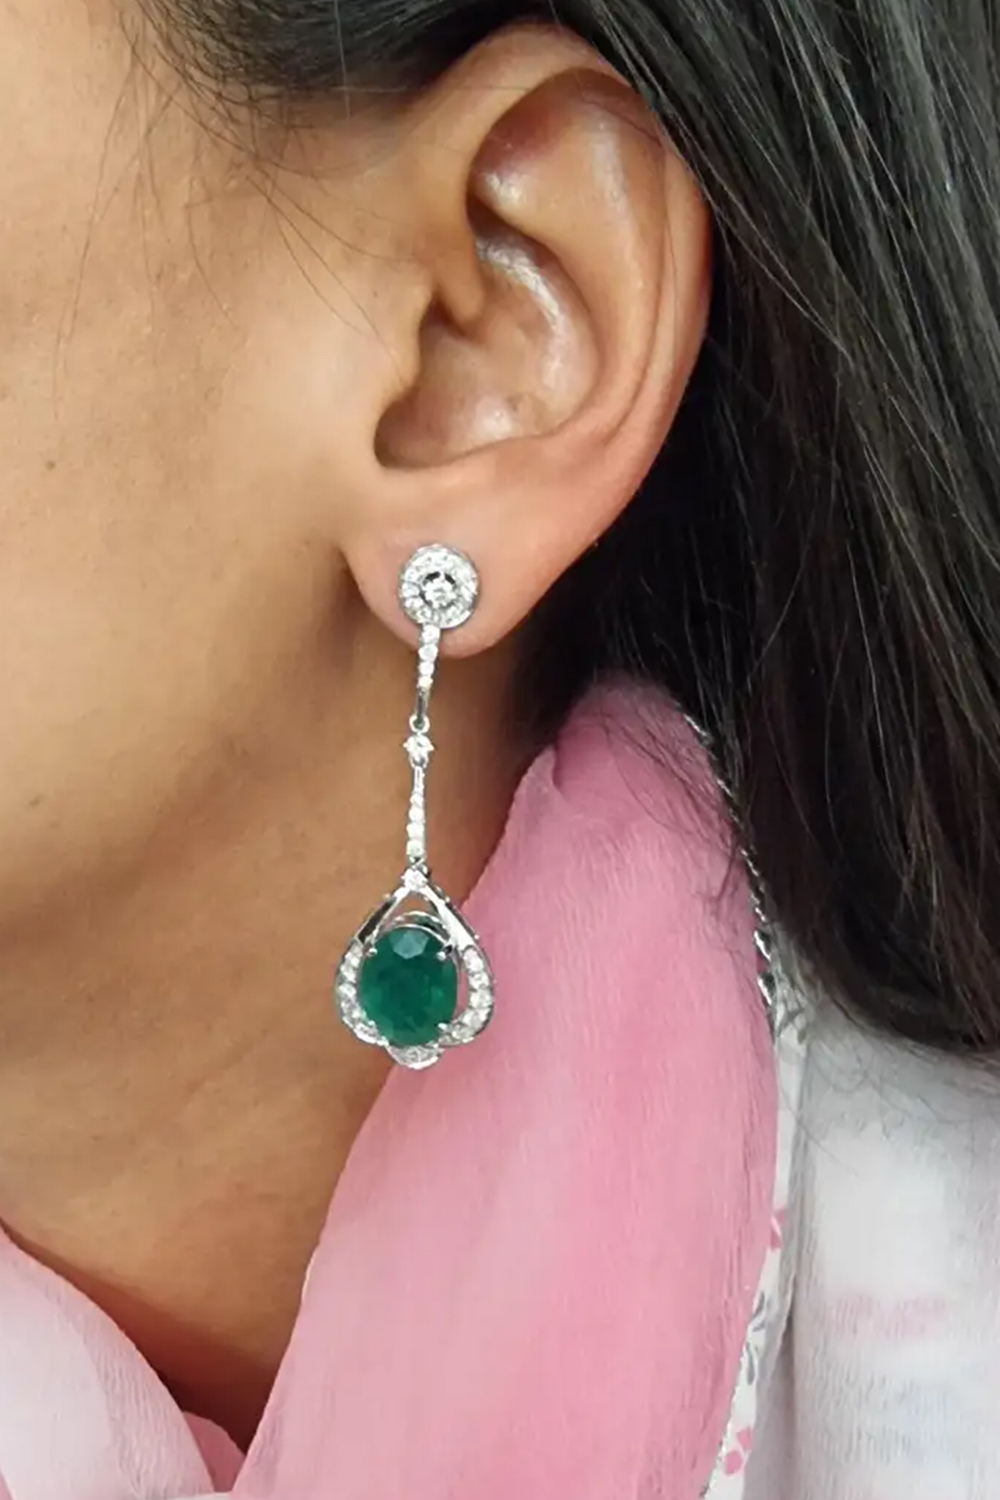 10.18cts Zambian Emerald Earrings with 1.43cts Diamonds and 14k Gold